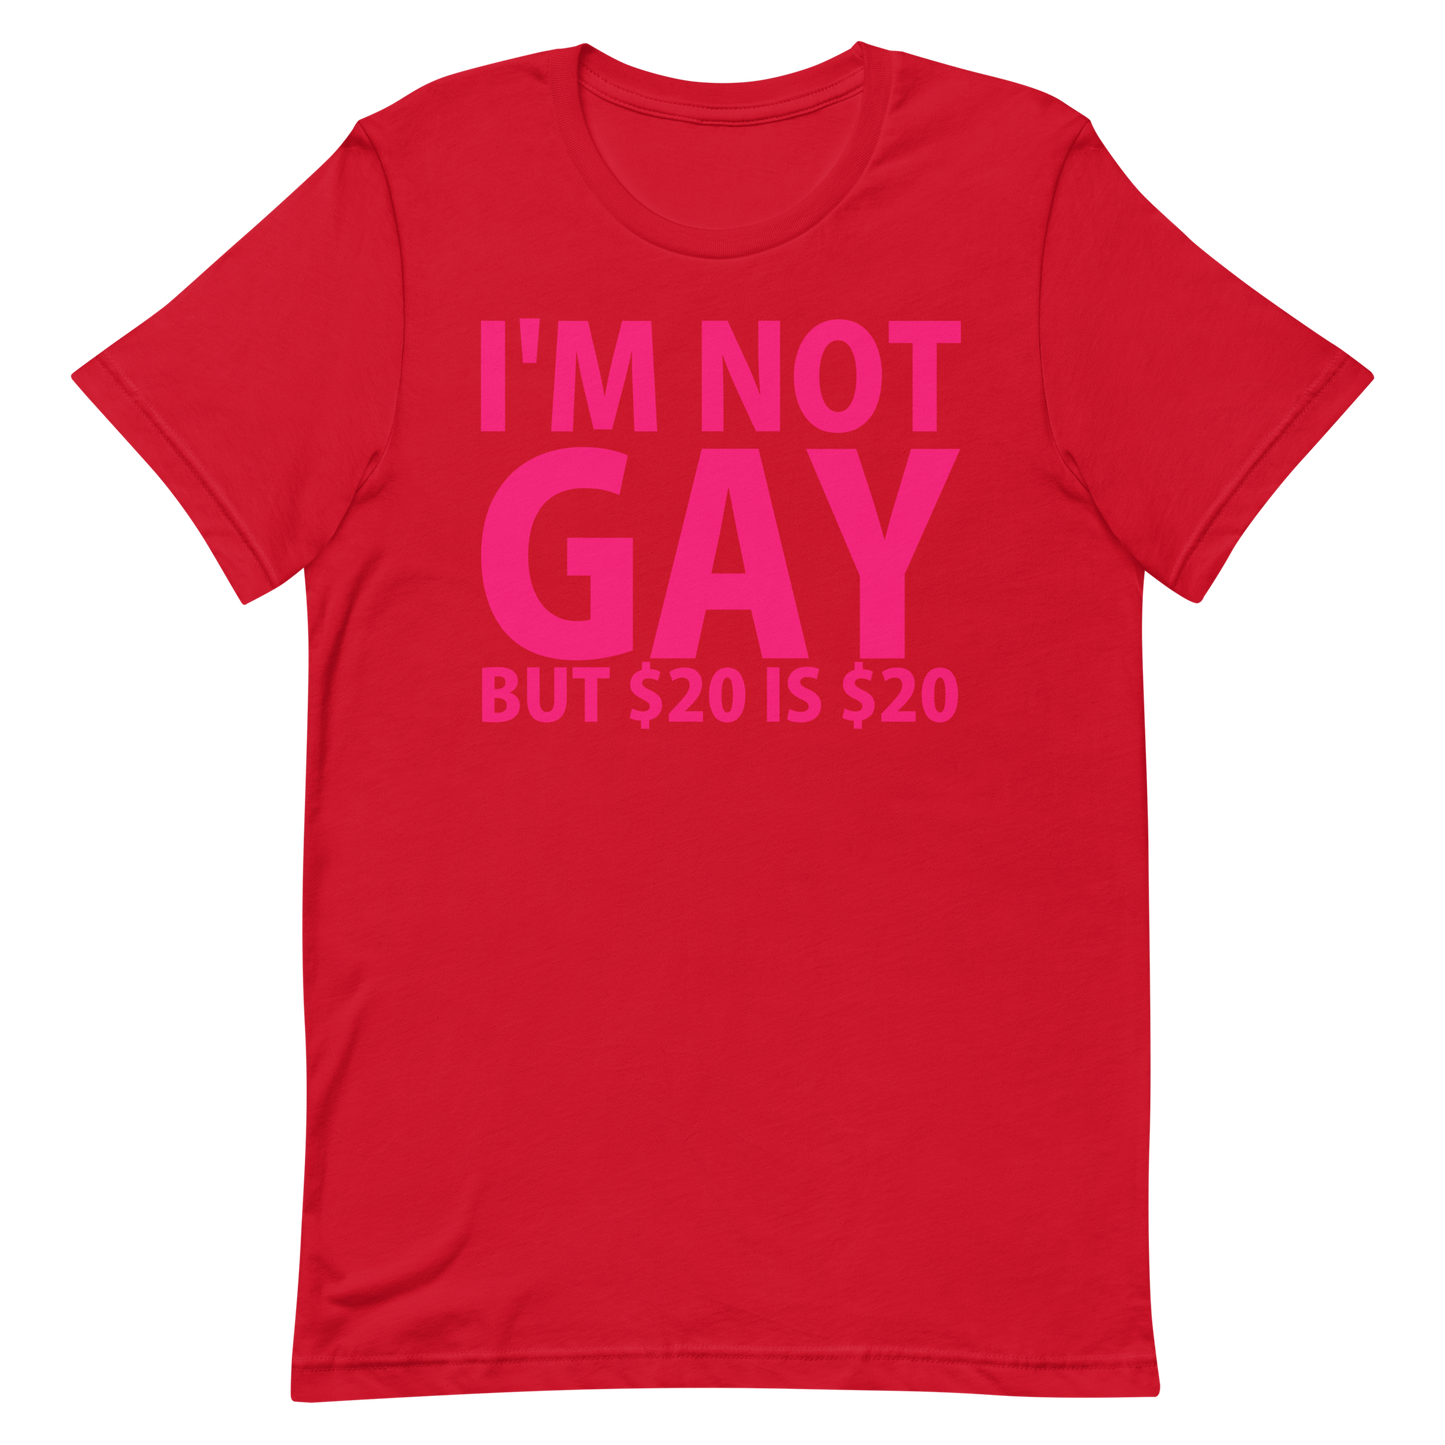 I'm Not Gay But $20 is $20 T-Shirt - Red